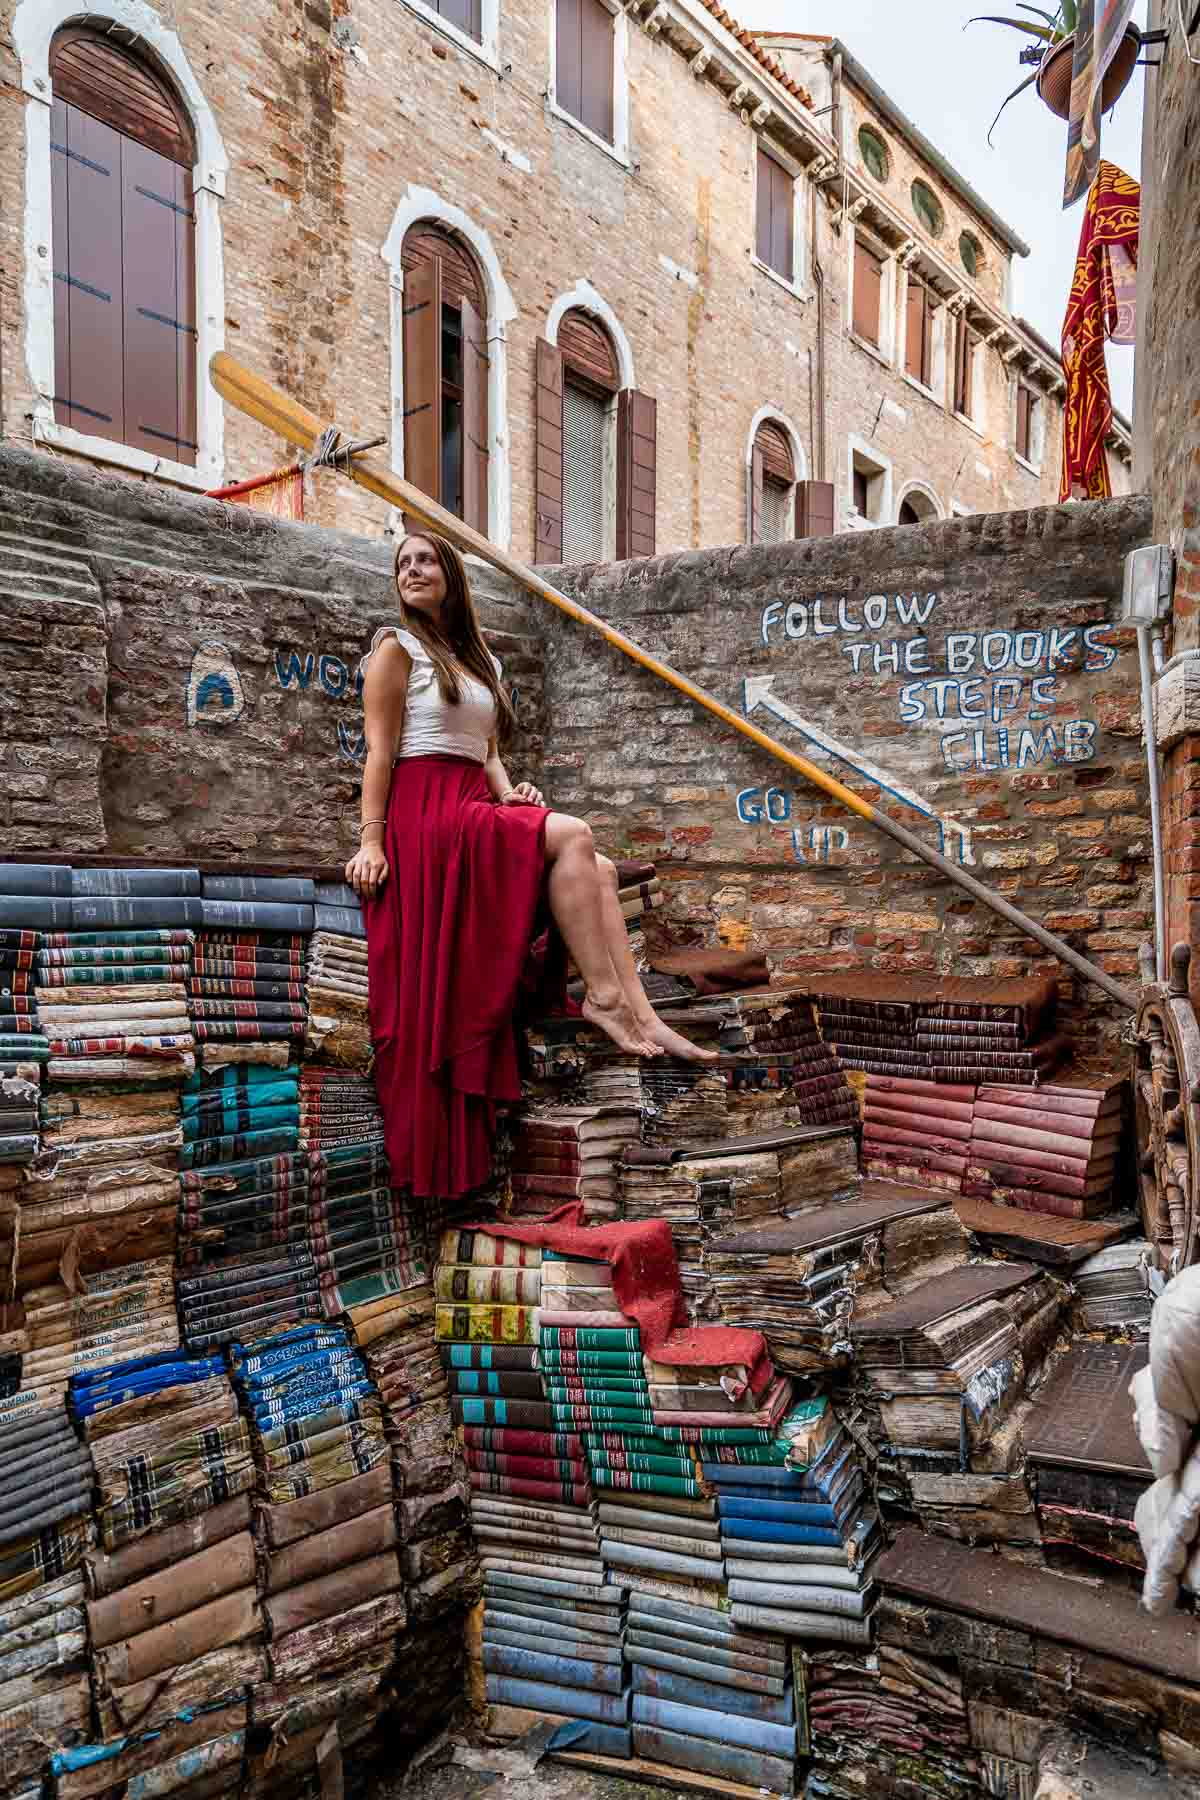 Girl in a red skirt sitting on top of the books at Libreria Acqua Alta in Venice, Italy